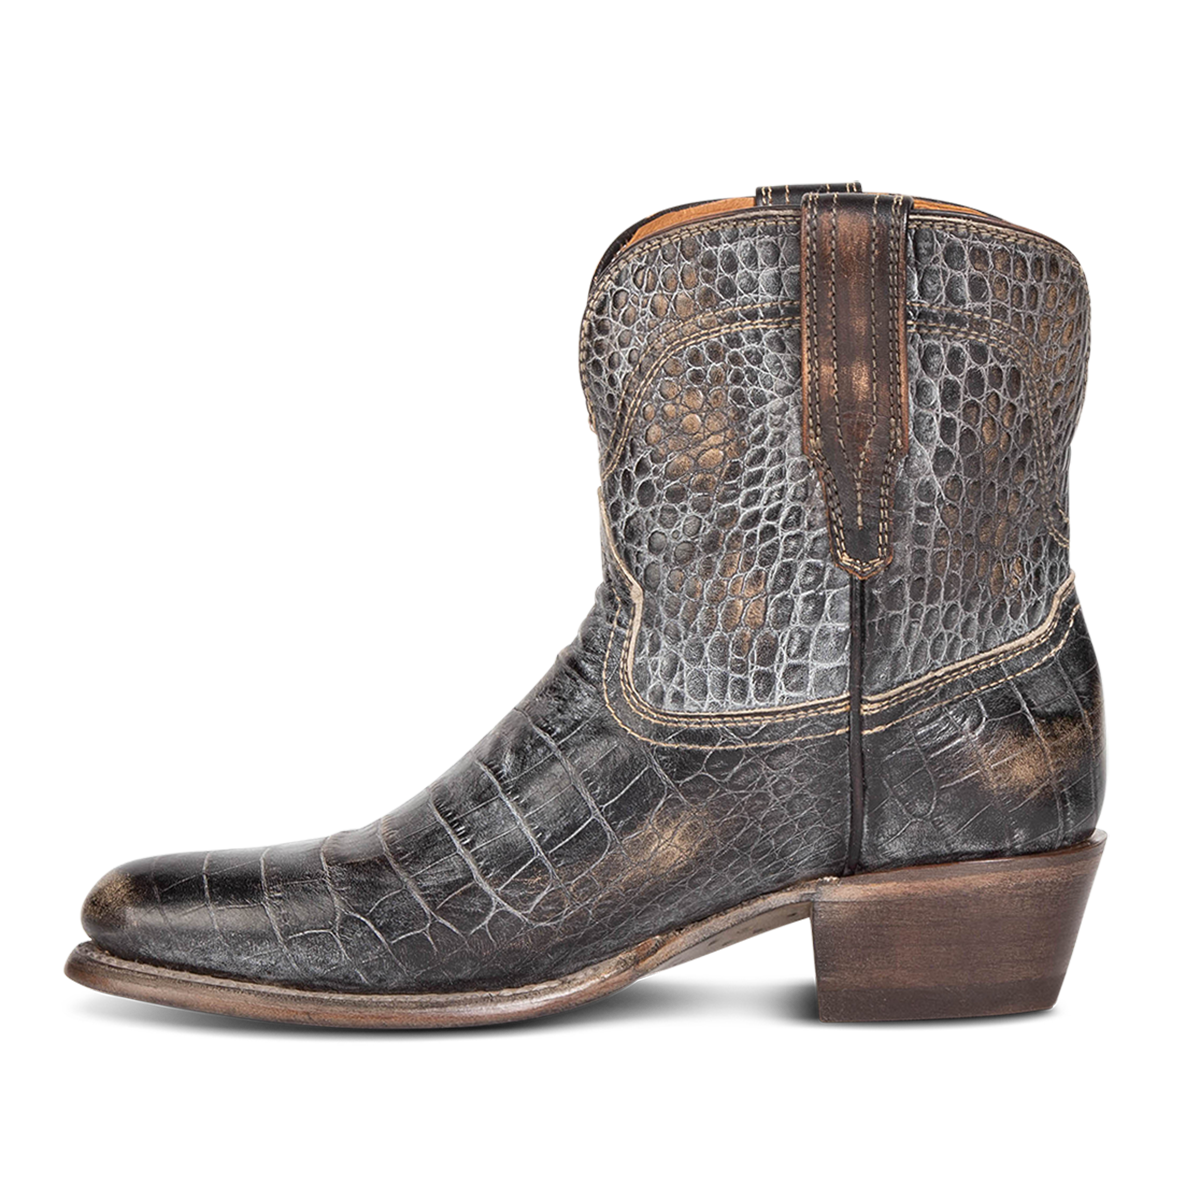 Side view showing leather pull straps and scallop detailing on FREEBIRD women's Zamora graphite multi bootie